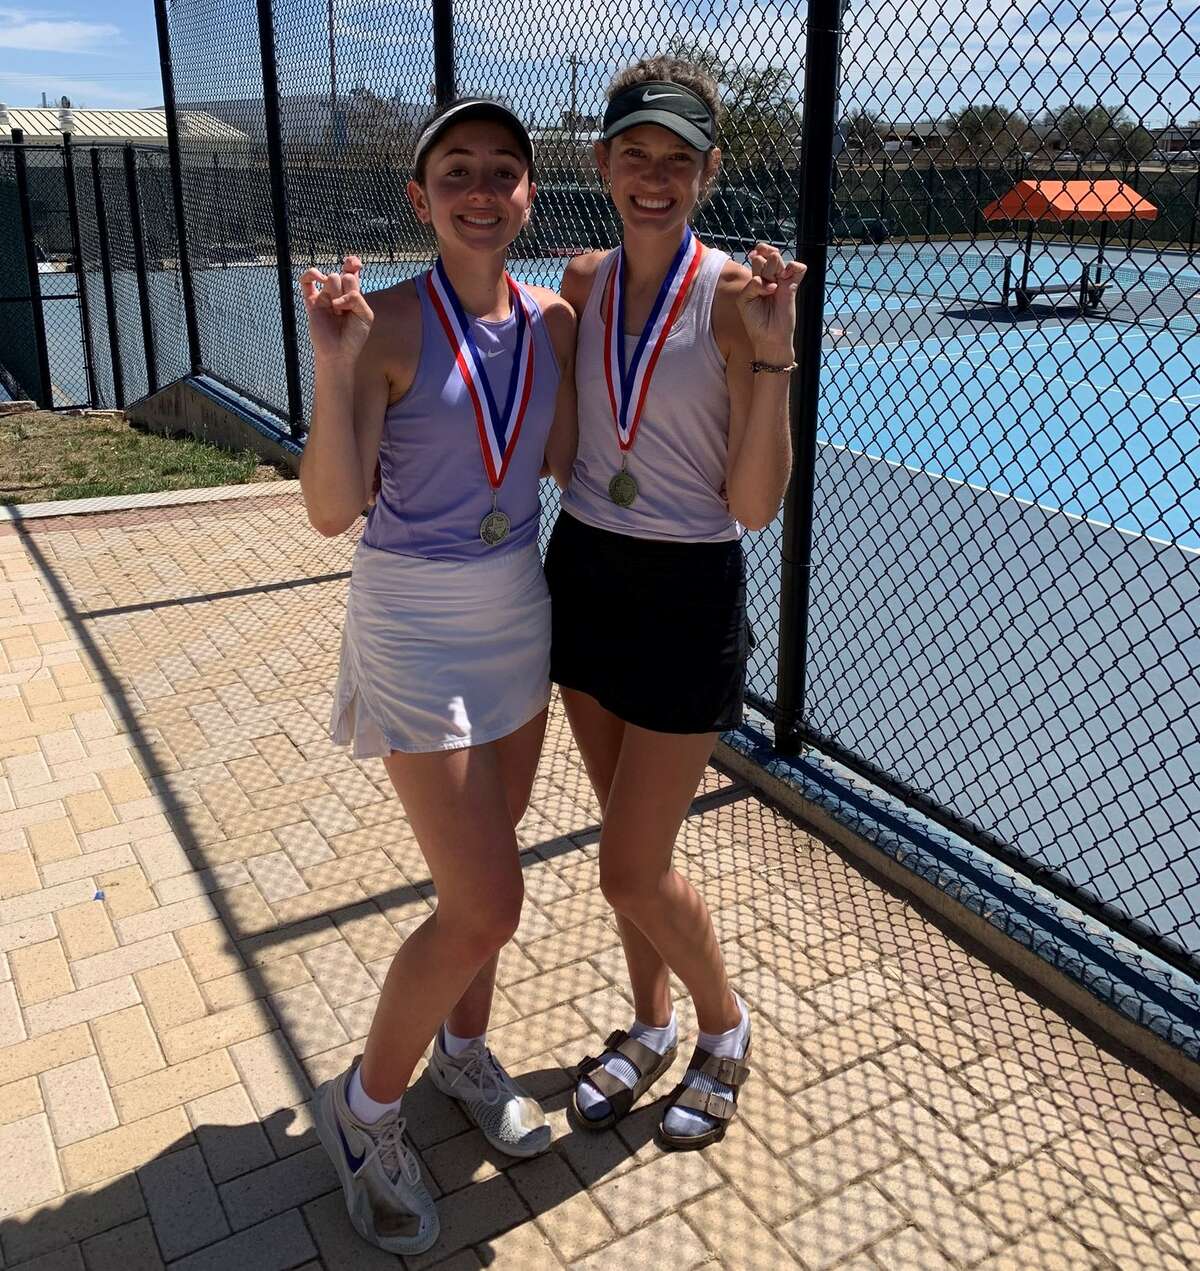 Midland High senior Montserrat Salazar, left, and junior Sarah Stewart pose with their medals after finishing second and first at the District 2-6A Tennis Tournament, March 31 in San Angelo. 